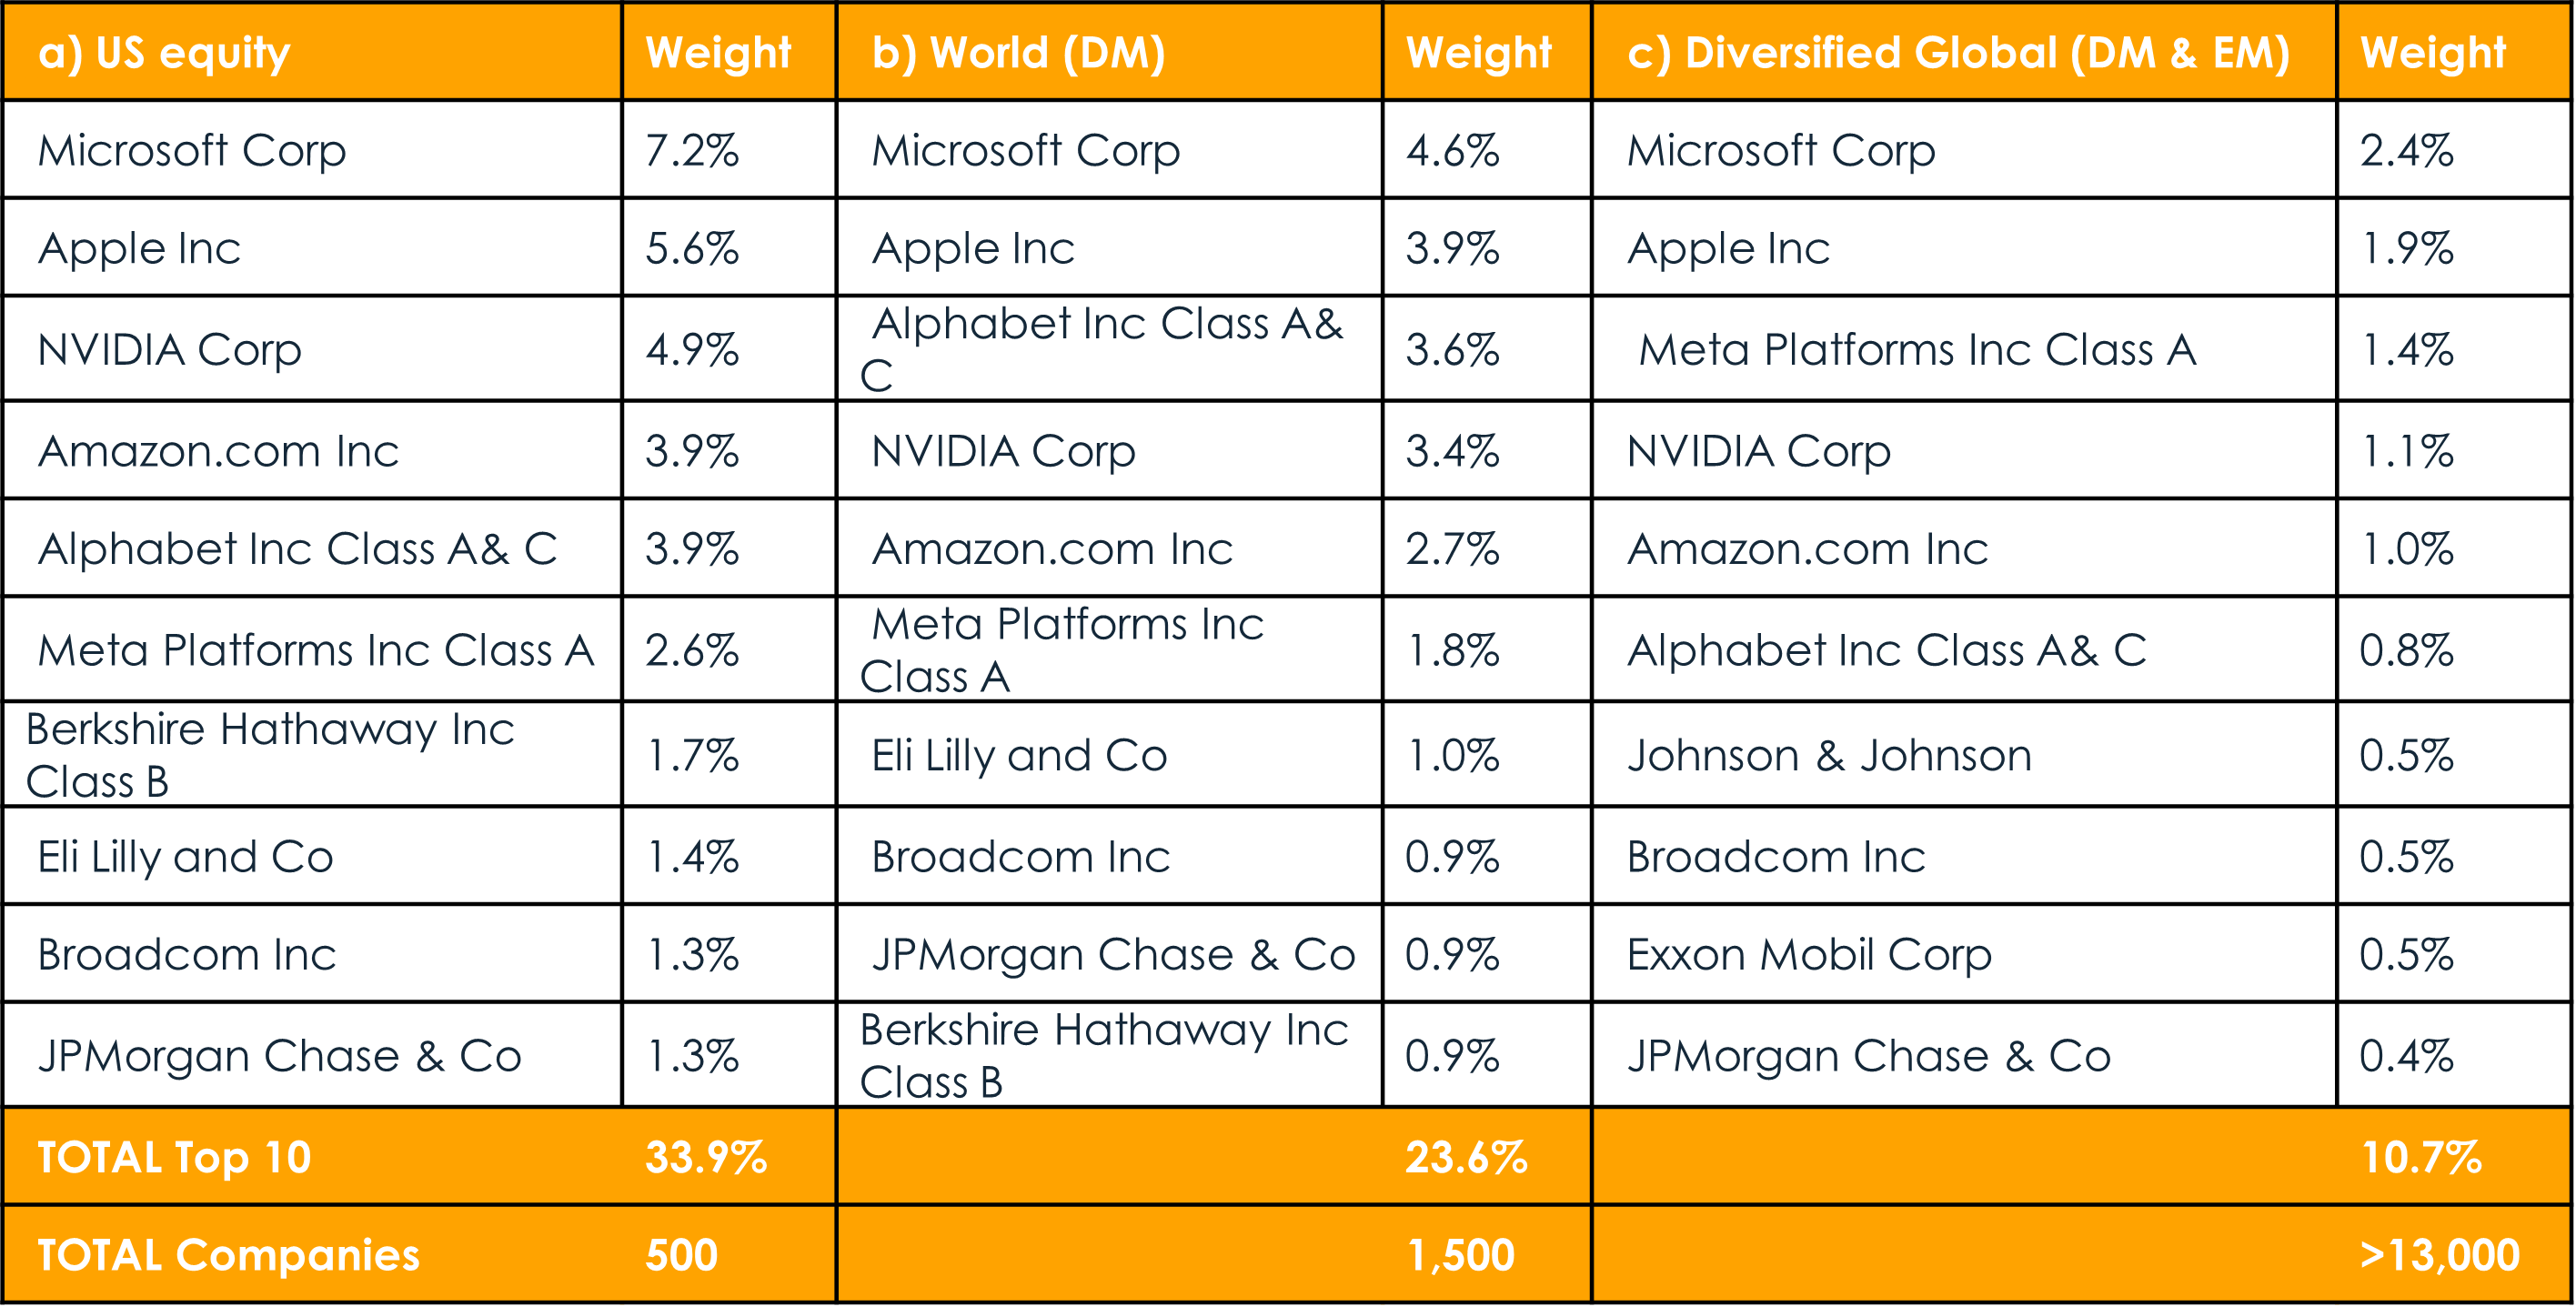 Portfolio weightings of Top 10 companies compared